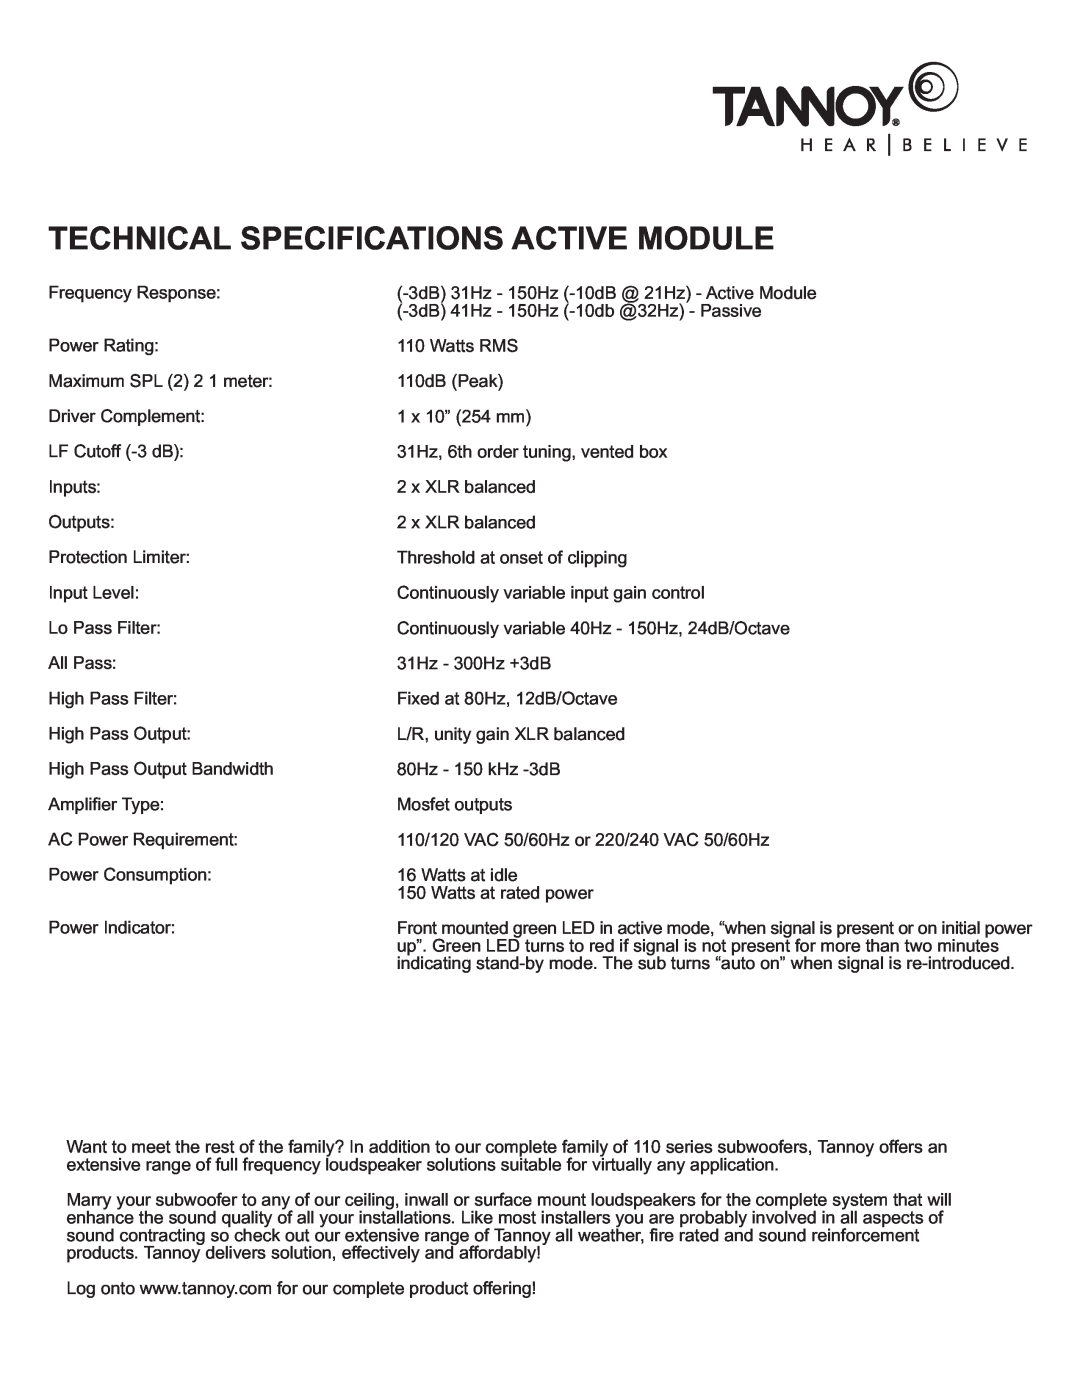 TOA Electronics 110SR owner manual Technical Specifications Active Module 